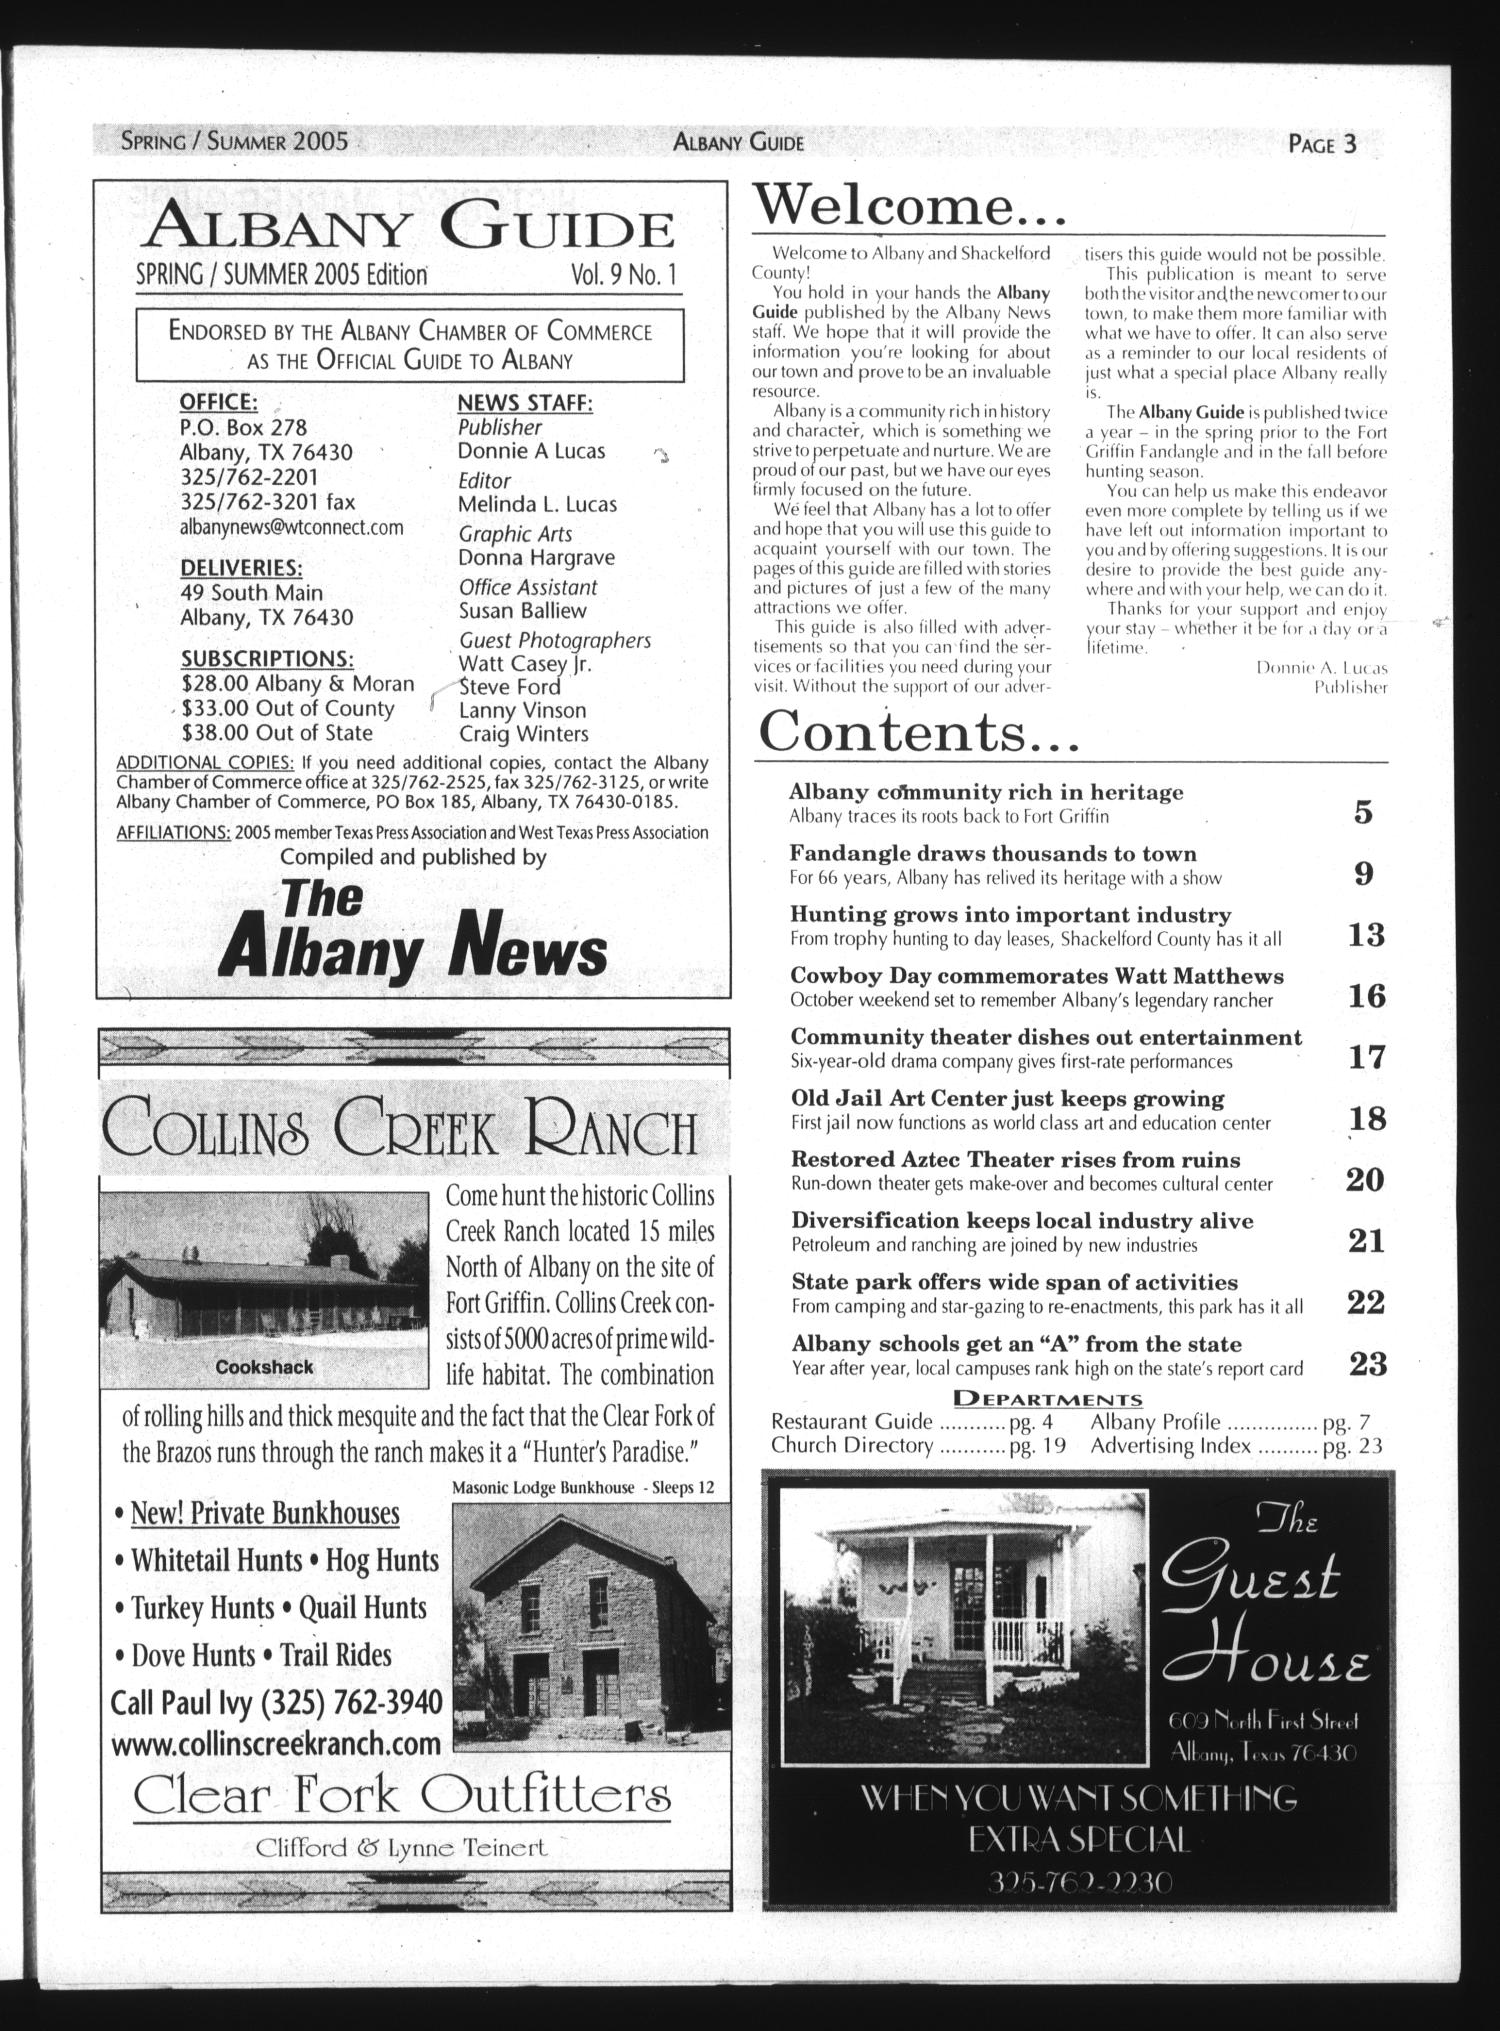 Albany Guide: Official Visitors Guide of the Albany Chamber of Commerce, Vol. 9, No. 1, Spring/Summer 2005
                                                
                                                    [Sequence #]: 3 of 24
                                                